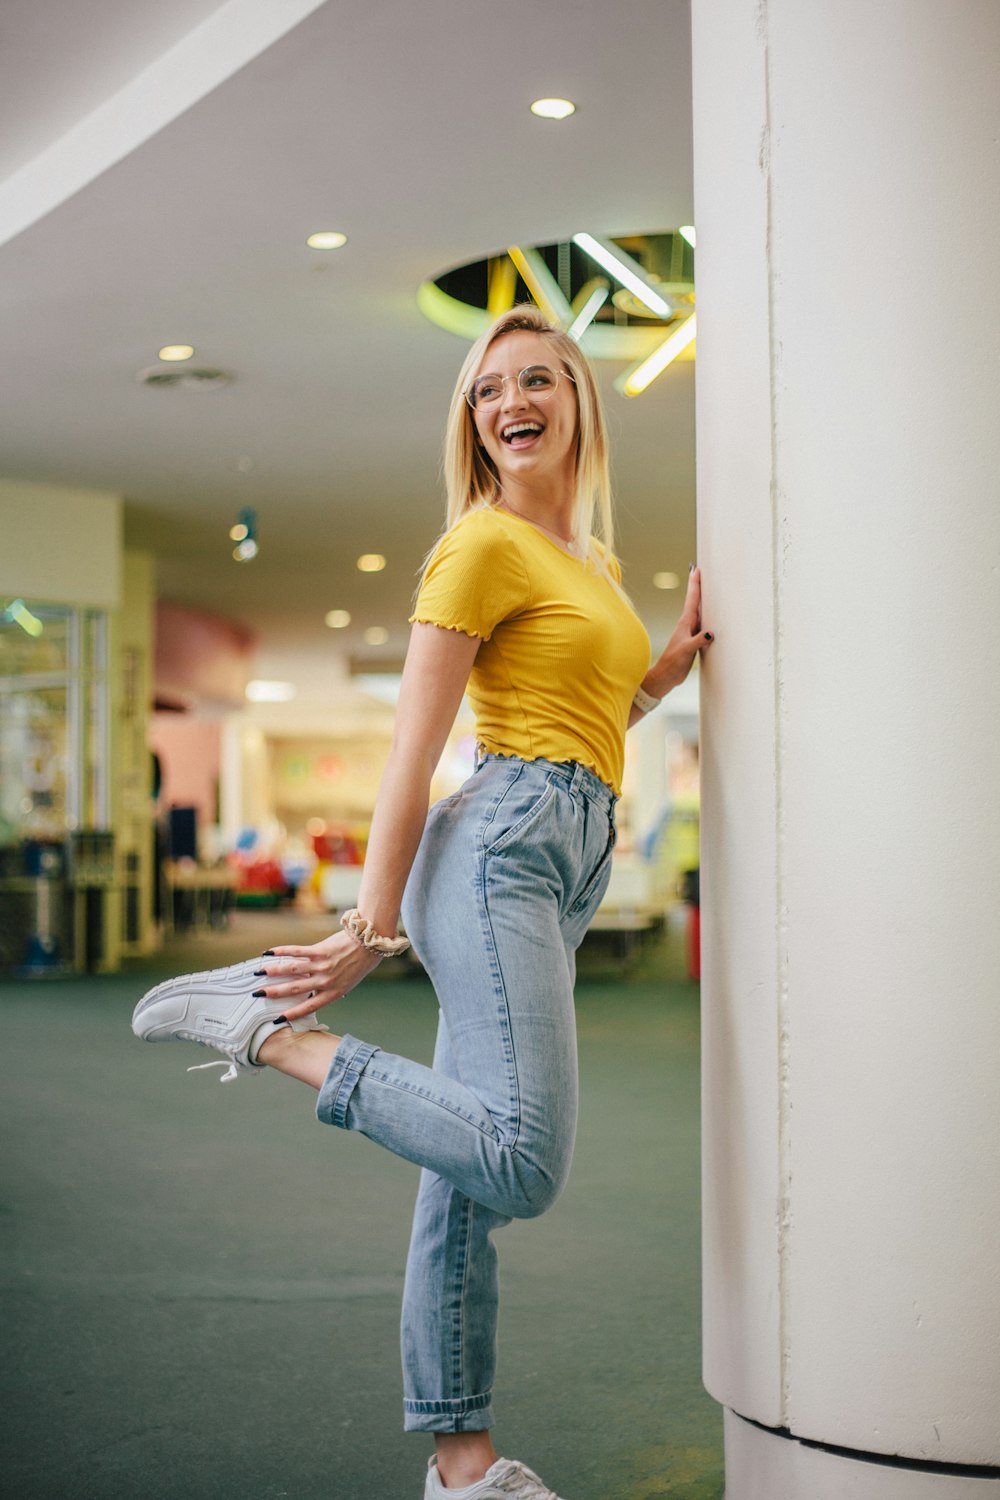 woman smiling and standing on one leg beside pillar